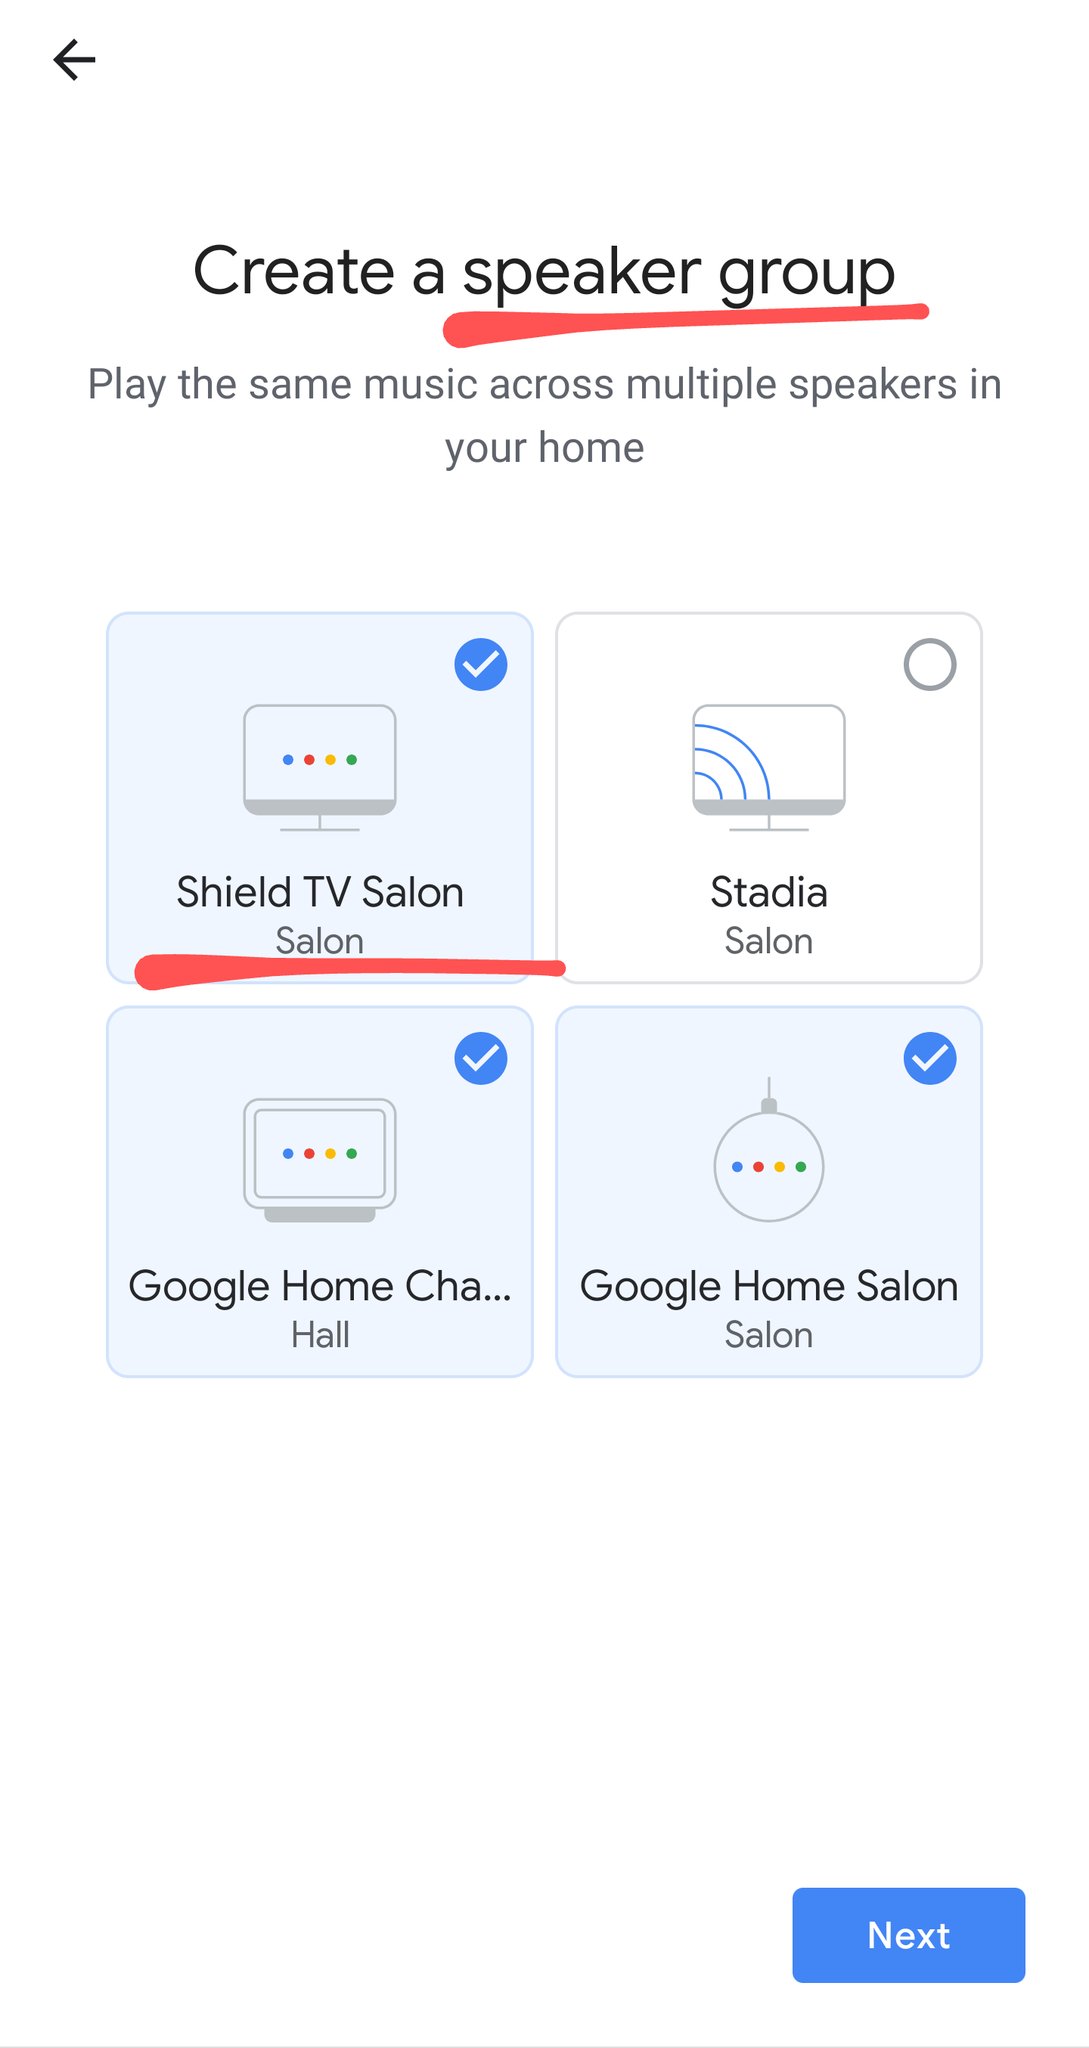 koks komponist Typisk Android TV Guide on Twitter: "Got an update for the Chromecast Built-in app  on my Shield TV yesterday and I can now add my #AndroidTV in a speaker  group ! Finally 😄